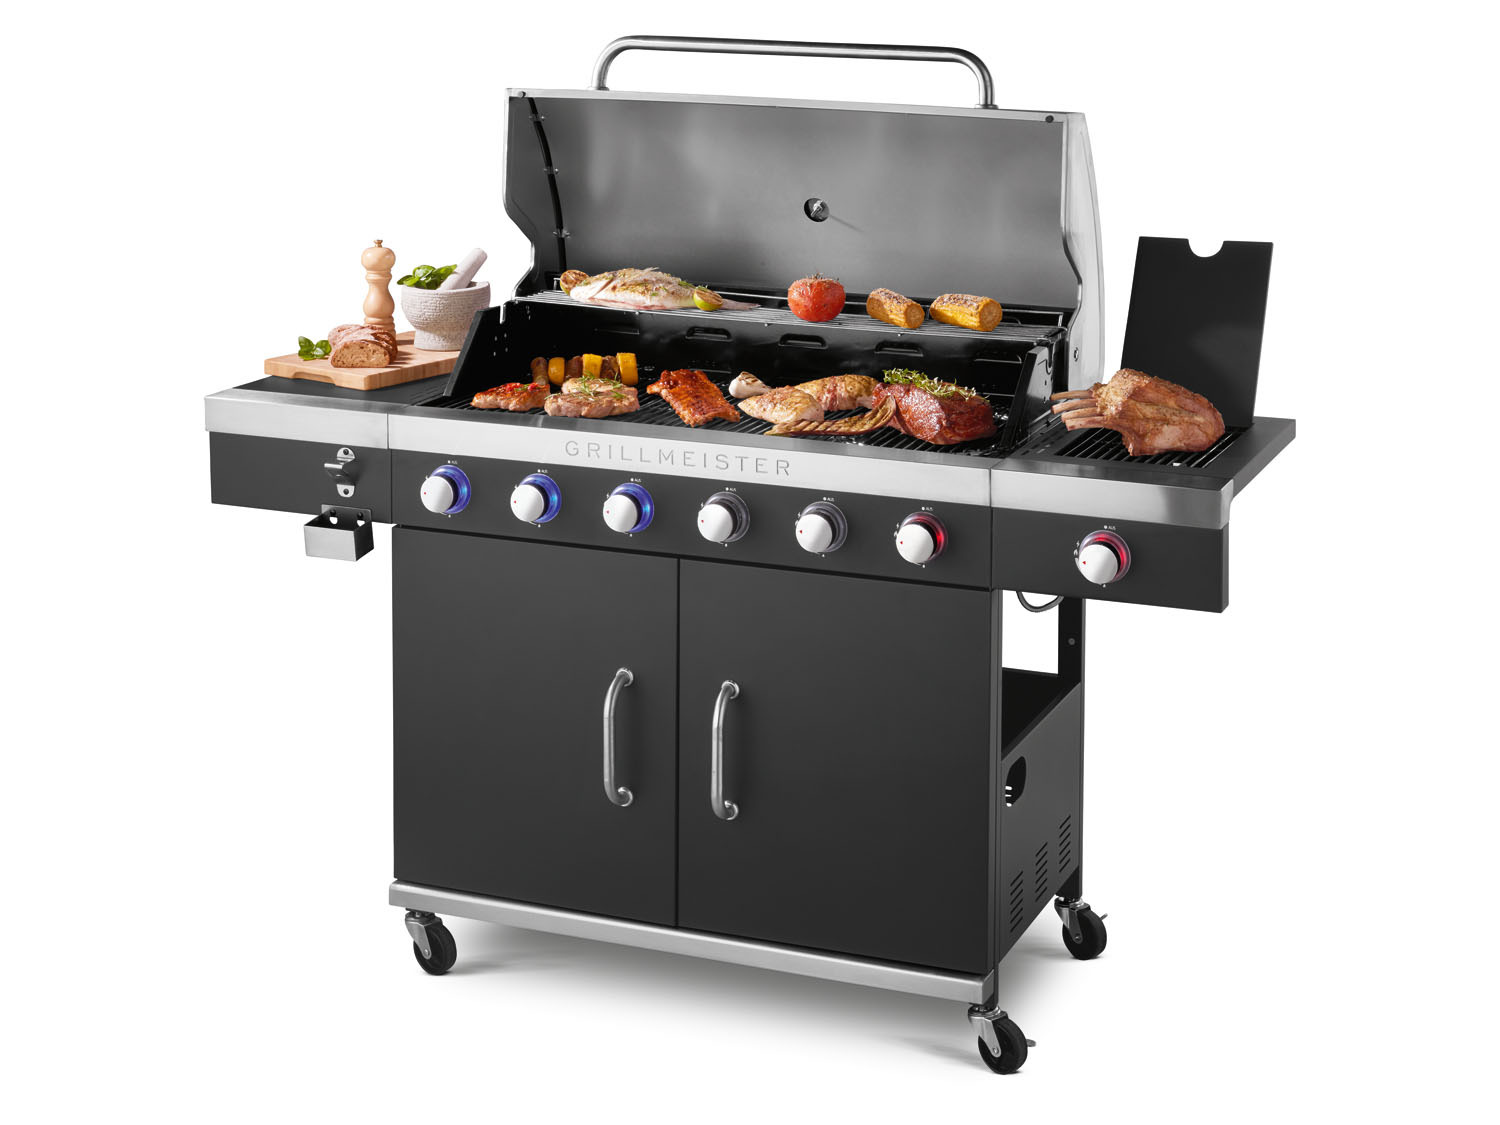 GRILLMEISTER Gasgrill, 6plus1 Brenner, 26,1 | LIDL kW